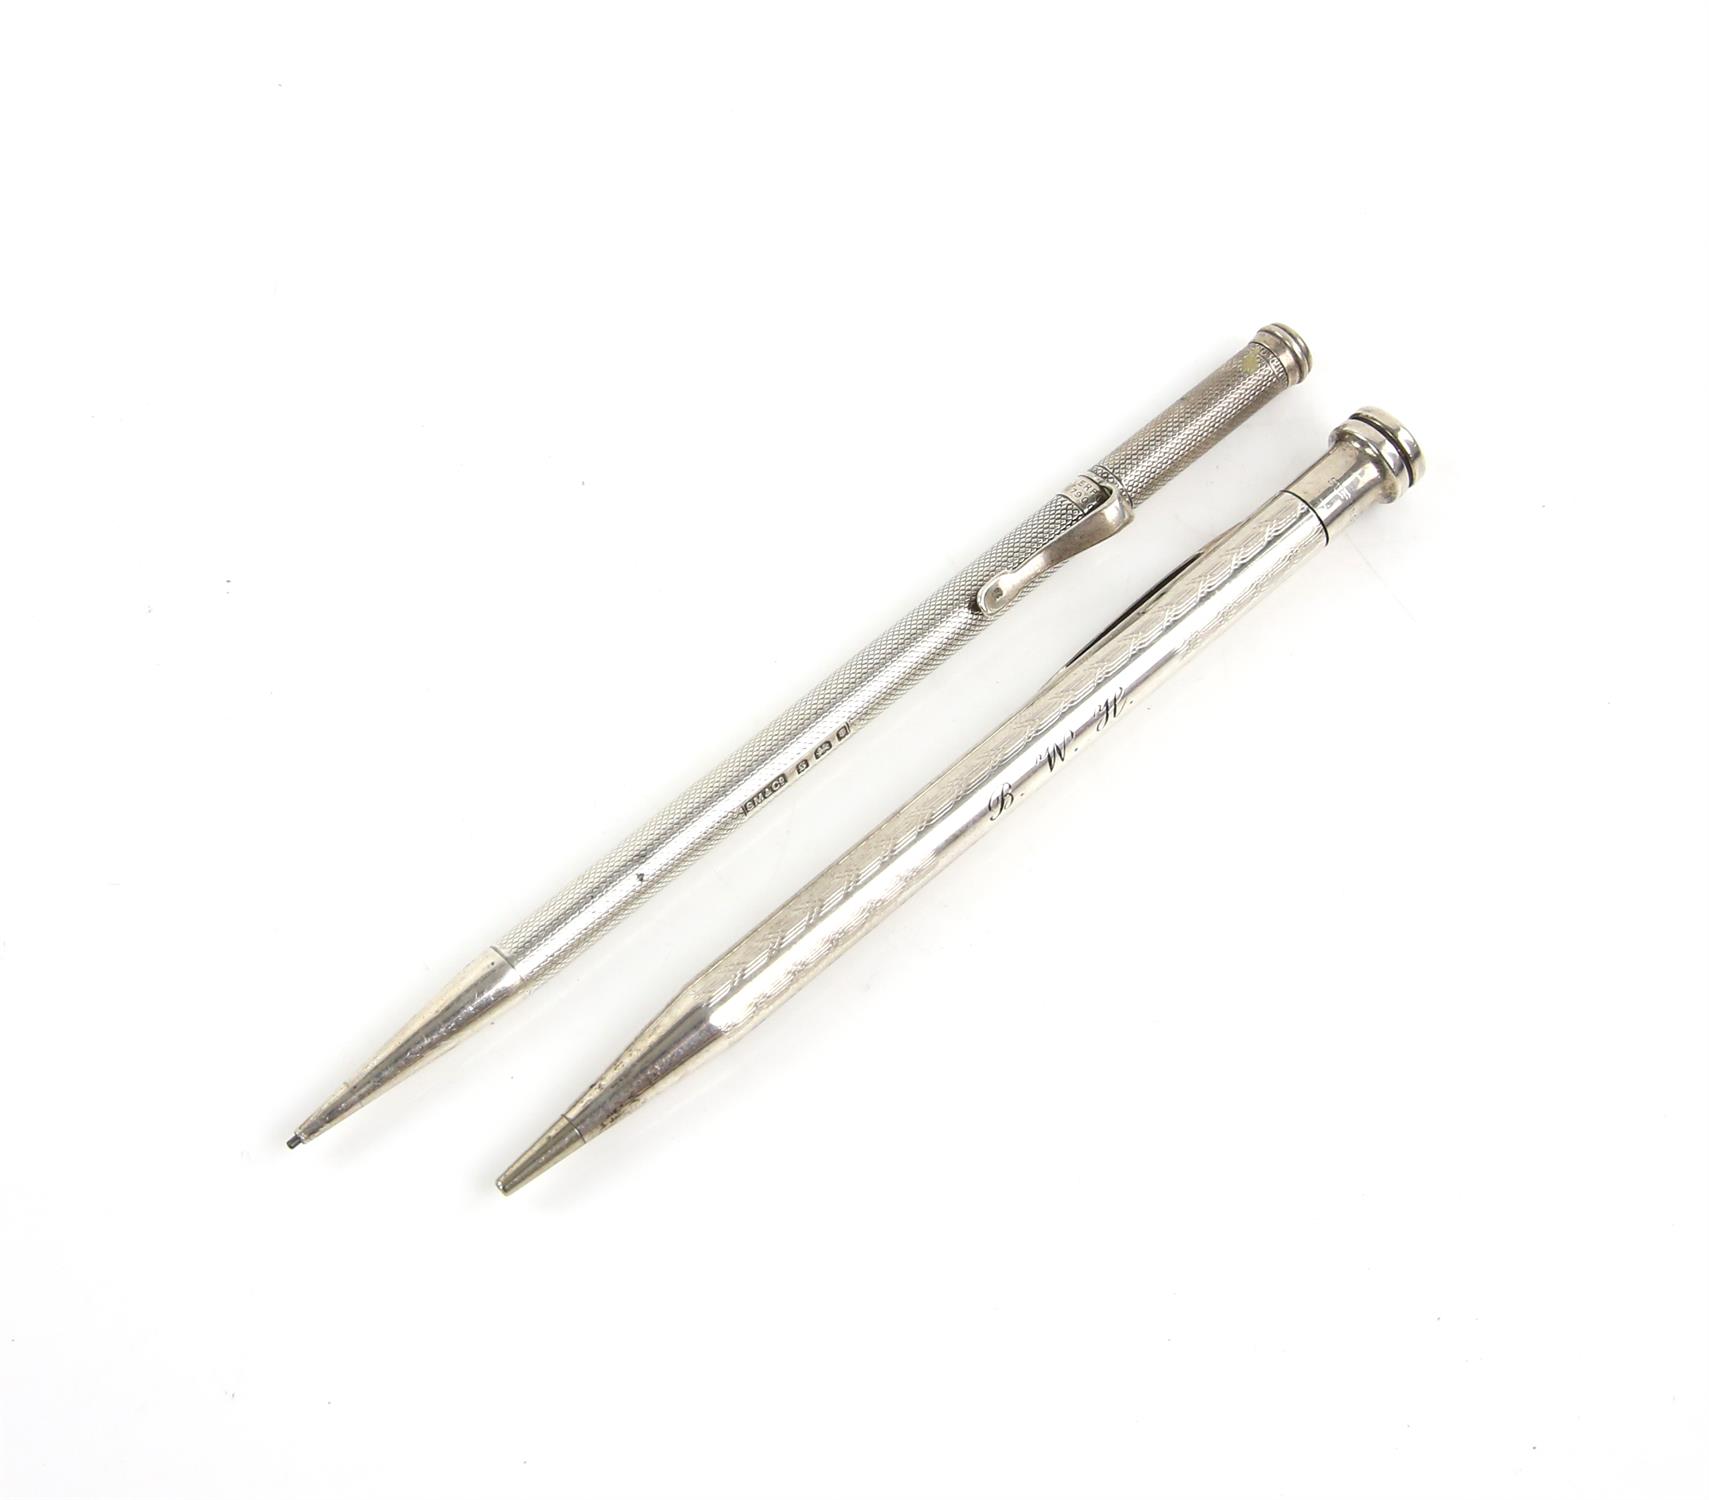 9 carat gold Yard O Led propelling pencil London 1965, and 5 silver propelling pencils , - Image 4 of 5